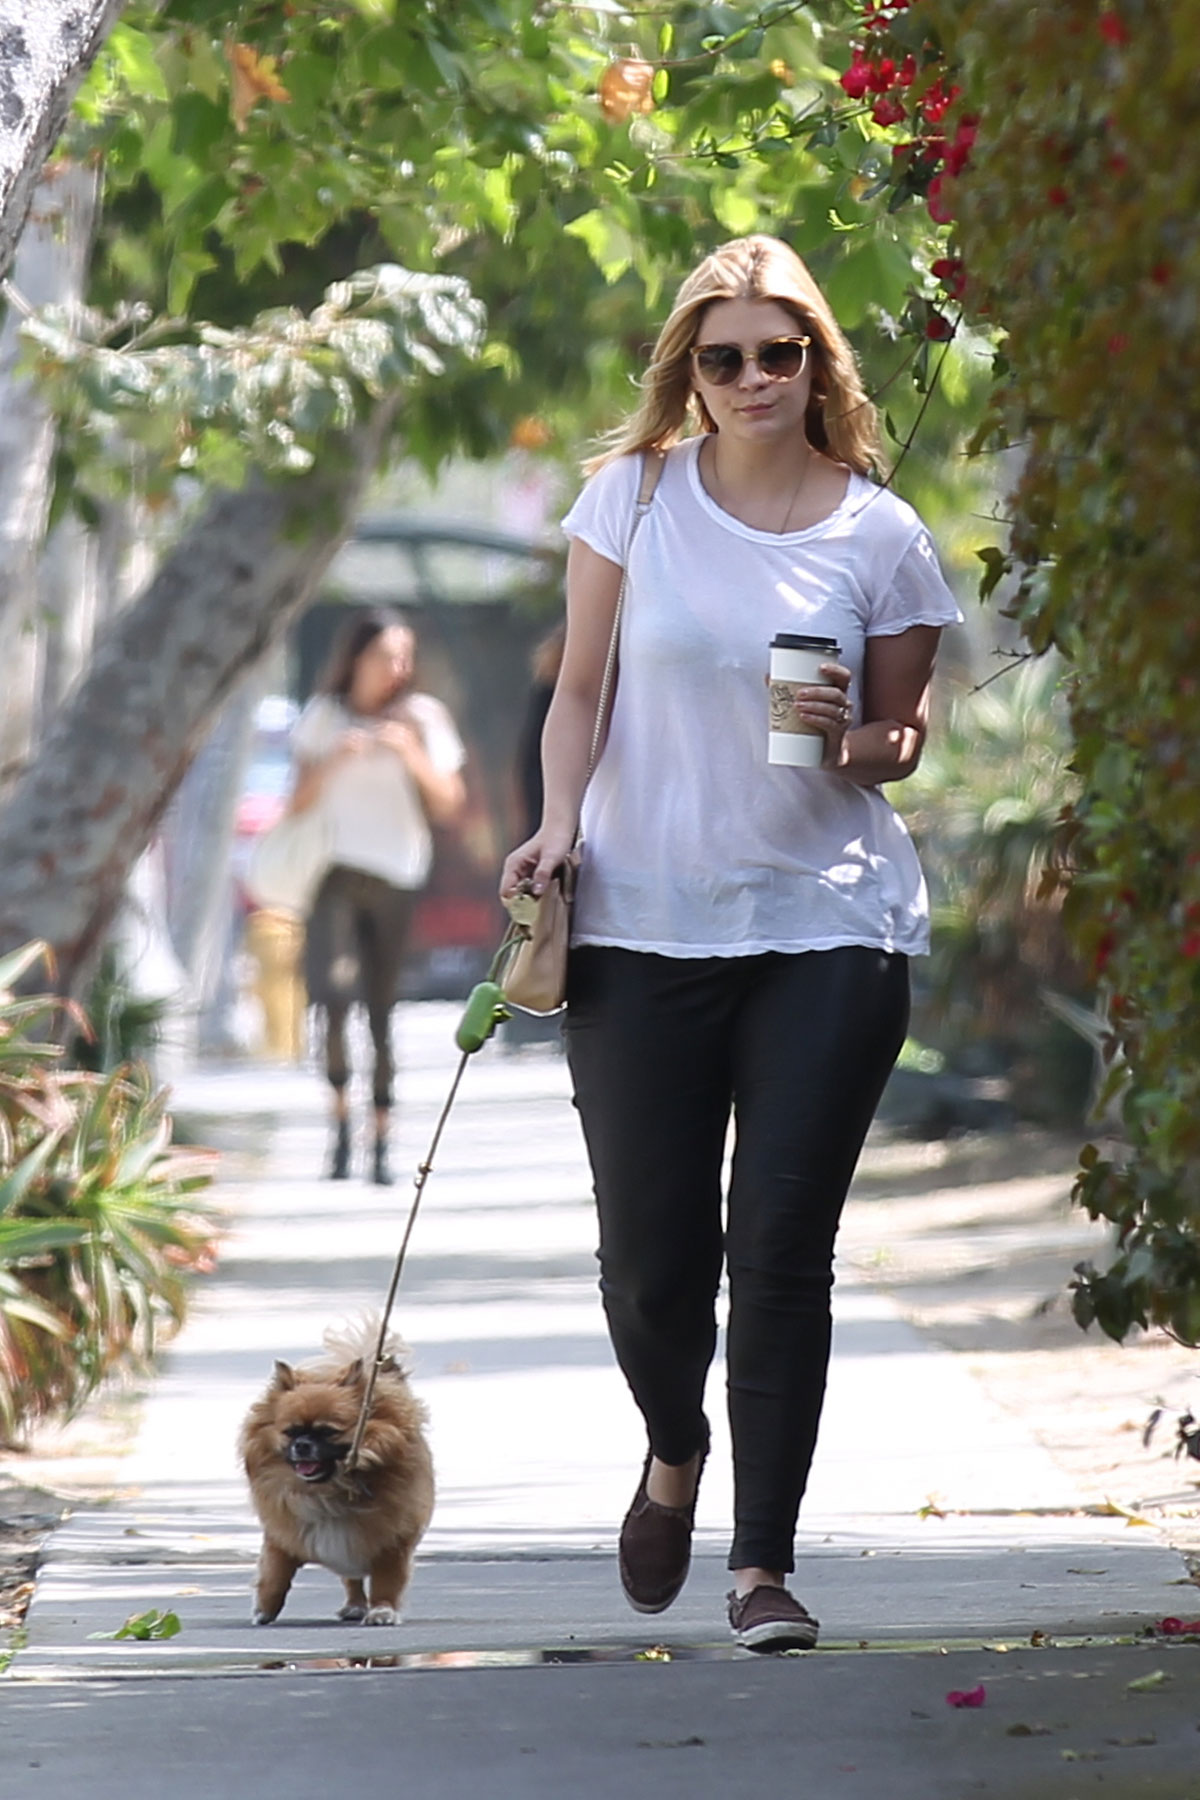 Mischa Barton strolling with her dog in Venice Beach